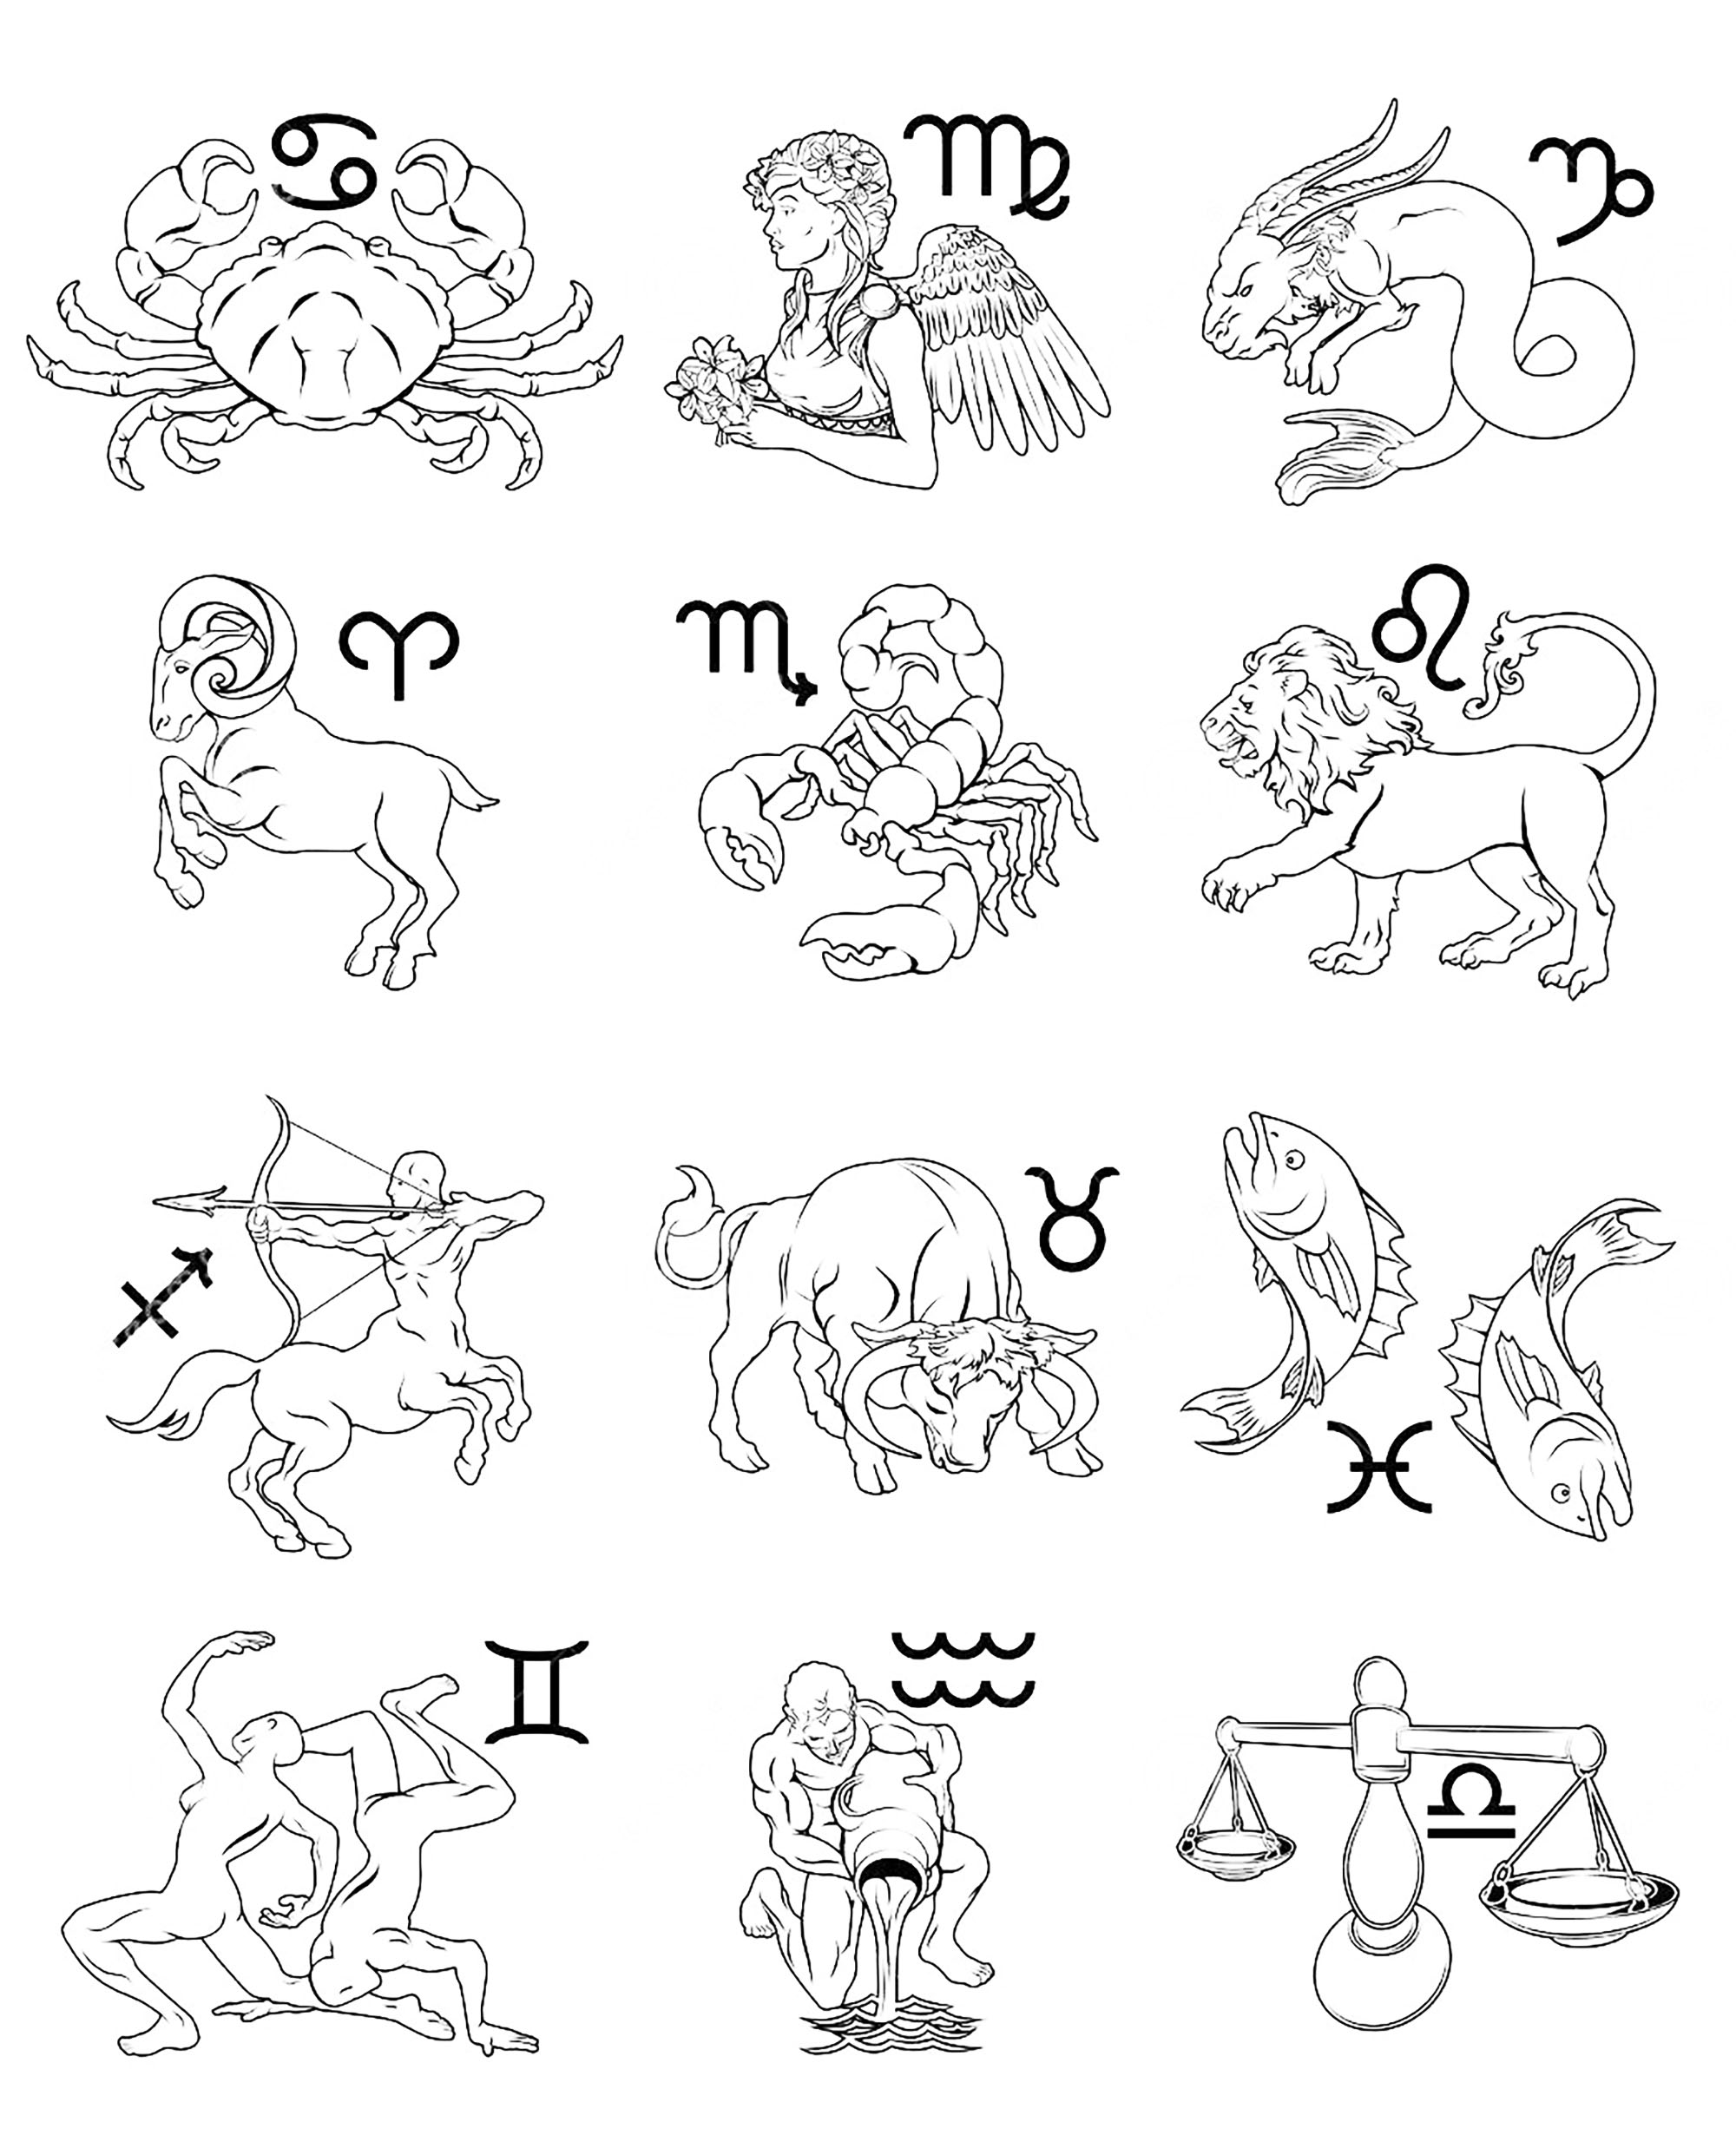 Zodiac signs astrology horoscope Myths & legends Adult Coloring Pages